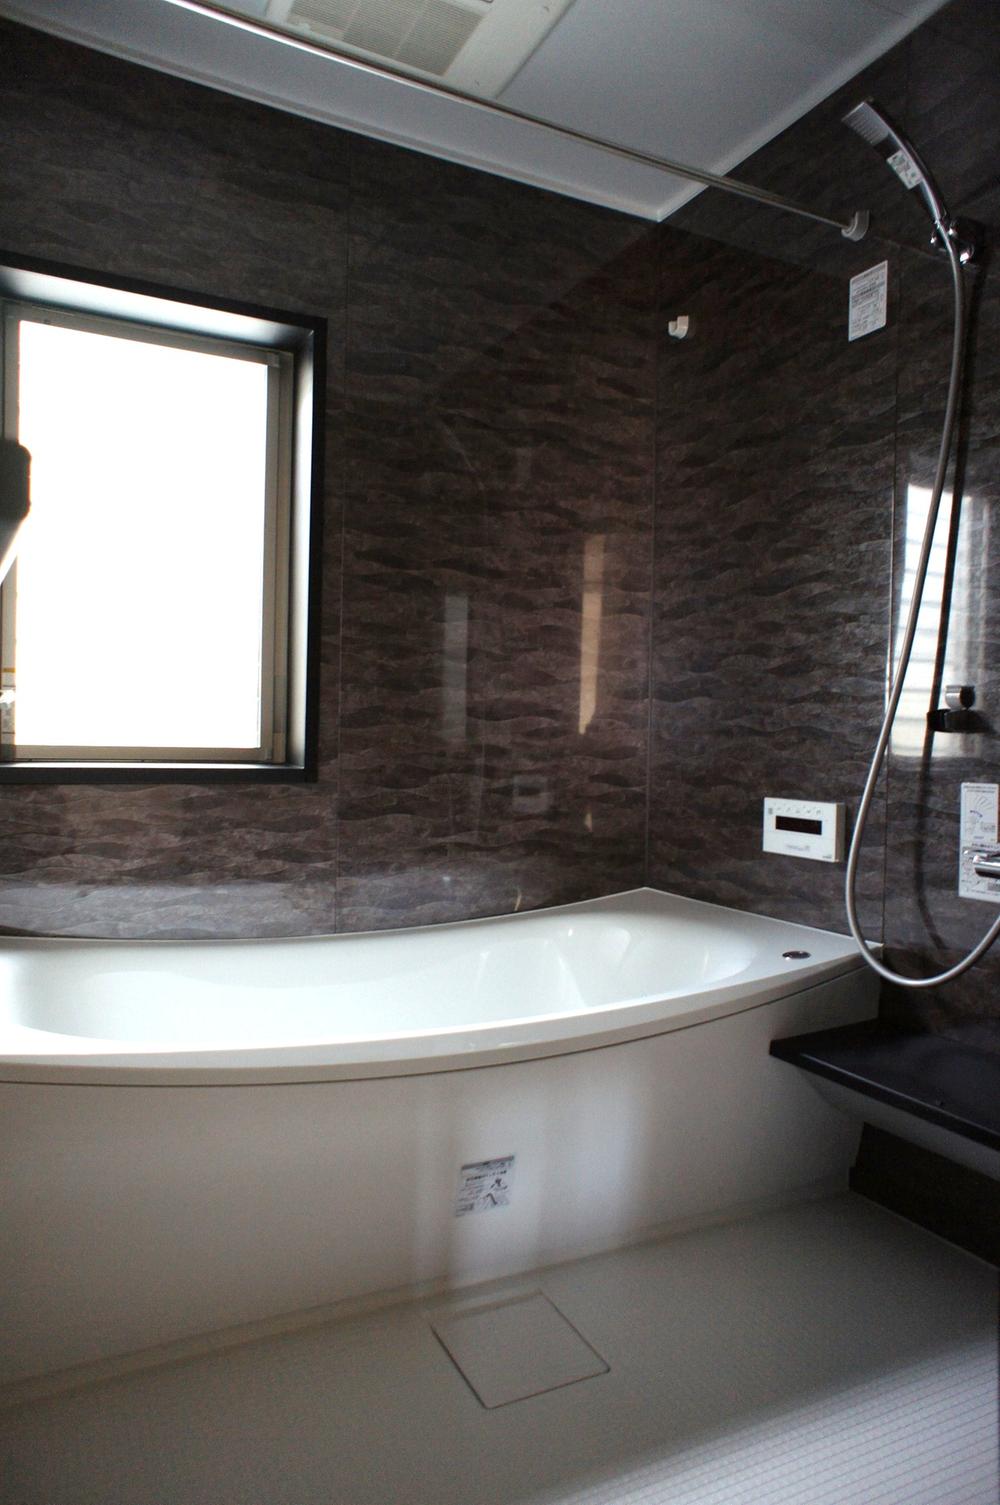 Same specifications photo (bathroom). Spacious 1 pyeong size